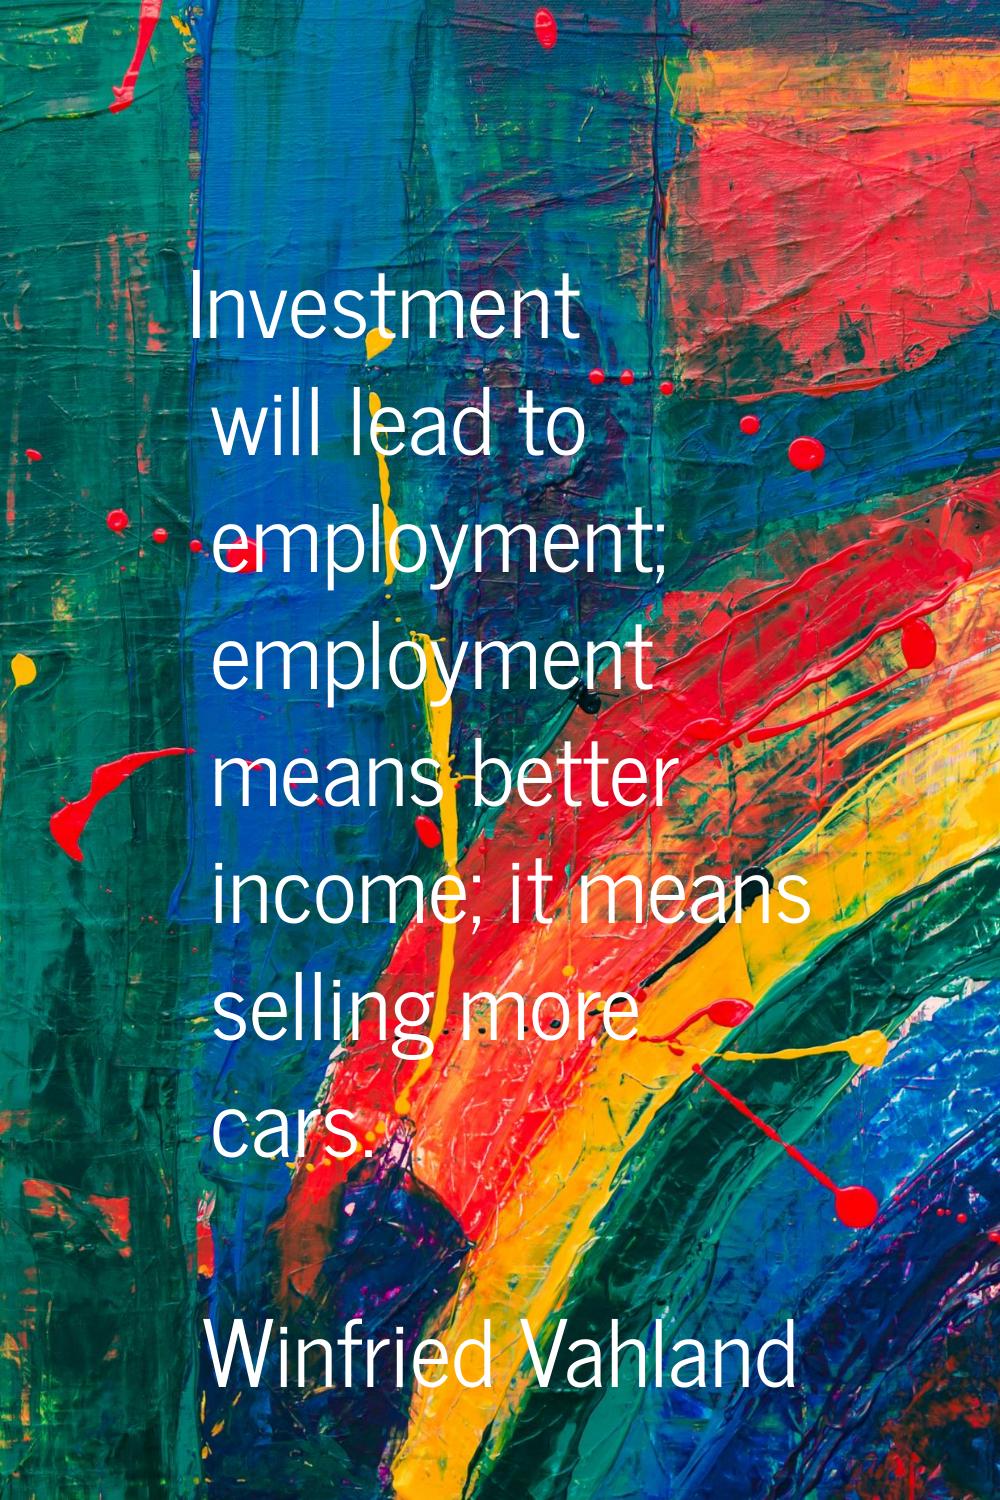 Investment will lead to employment; employment means better income; it means selling more cars.